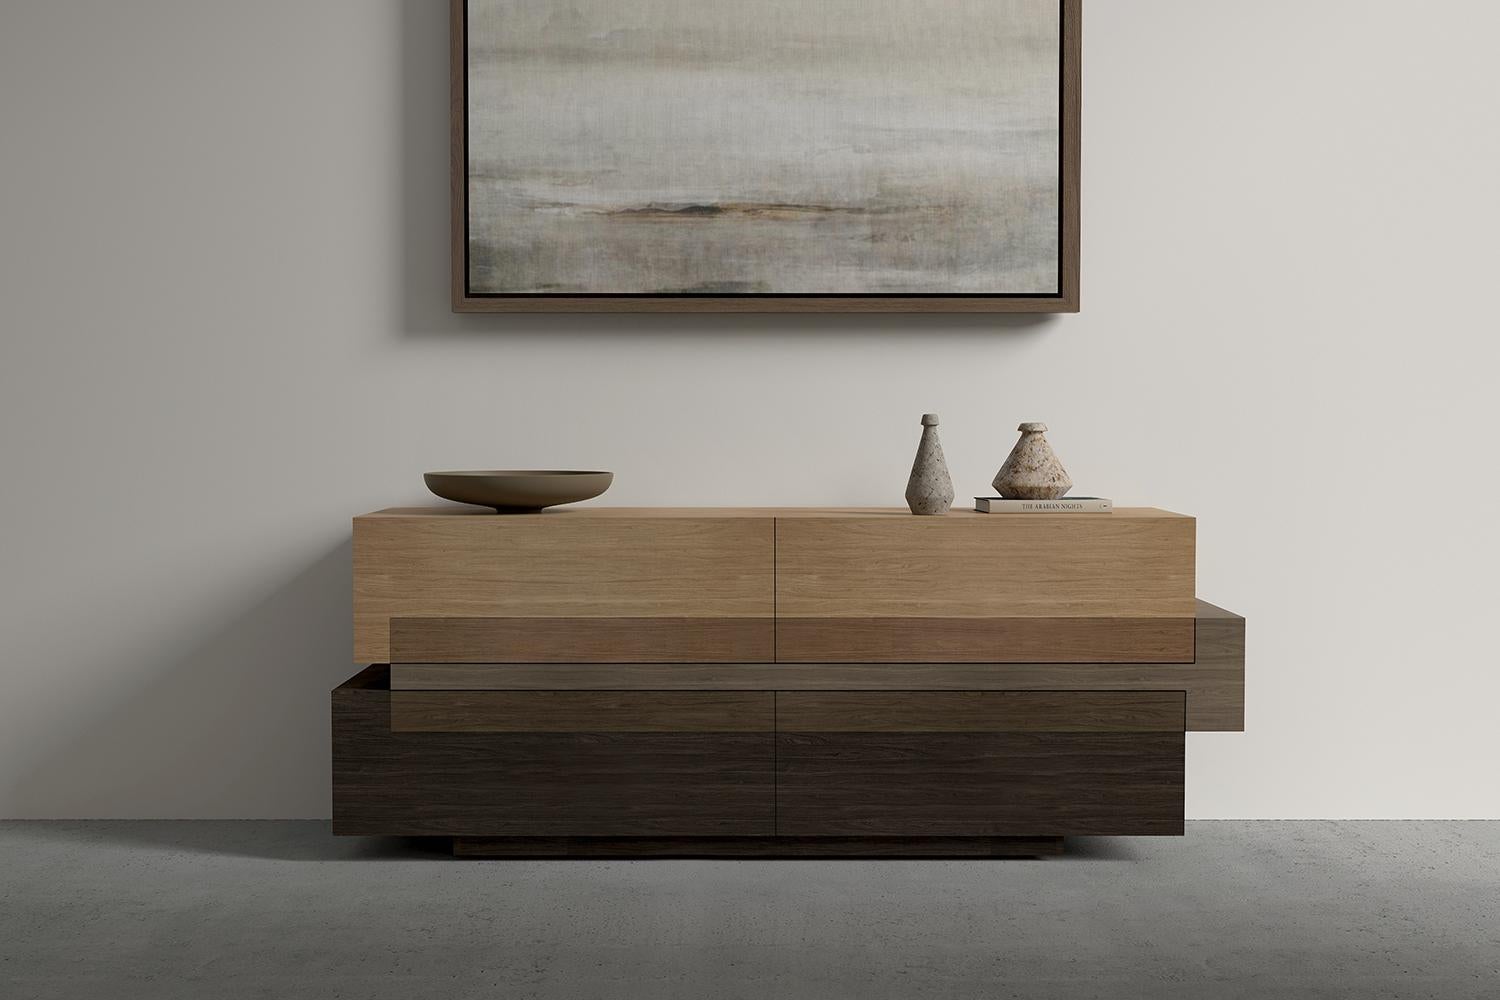 Booleanos Sideboard, Credenza, Console in Warm Wood Veneer by Joel Escalona

Booleanos collection reflects the concept of involuntary interactions and unexpected intersections. 

Geometric credenza designed by Joel Escalona, configured with four